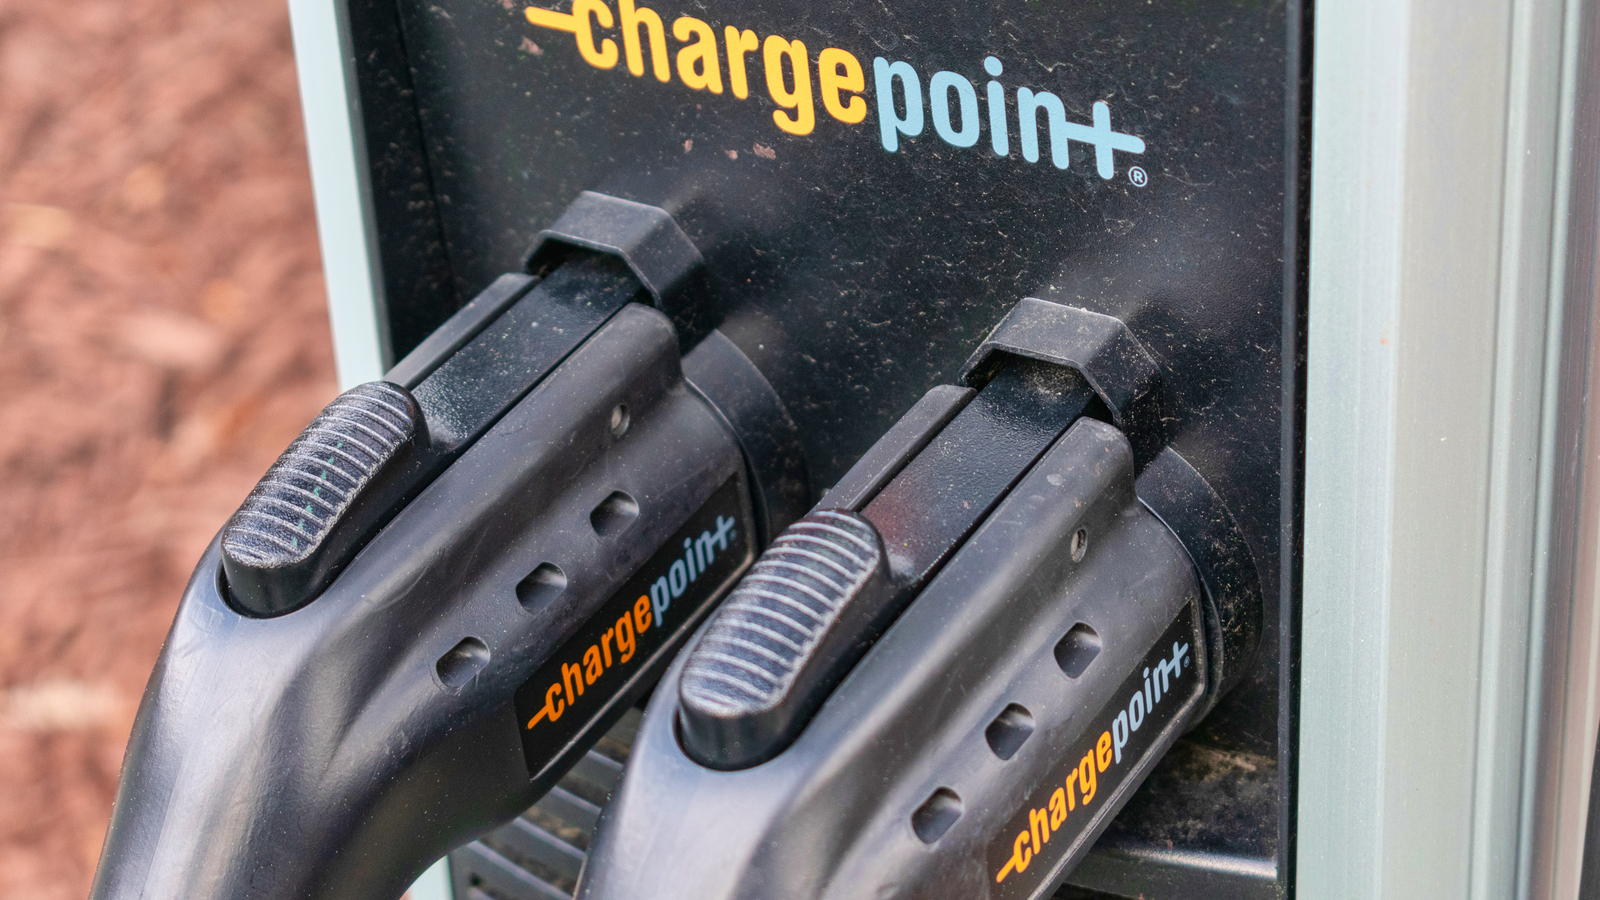 CHPT a chargepoint charging station